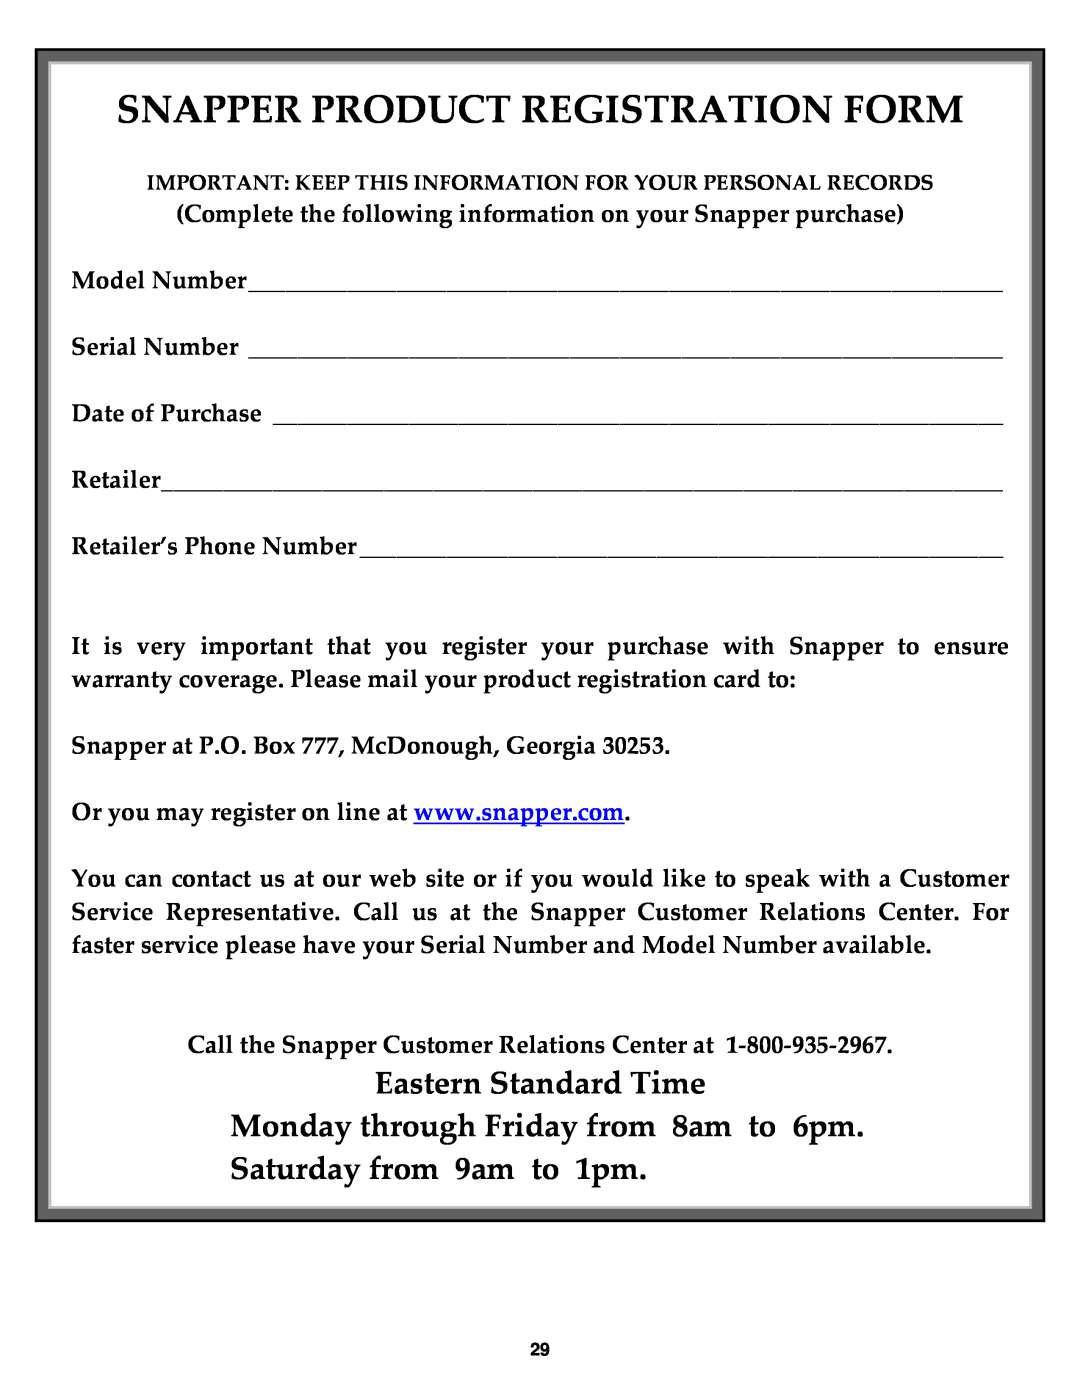 Snapper R215517HC Snapper Product Registration Form, Eastern Standard Time Monday through Friday from 8am to 6pm 